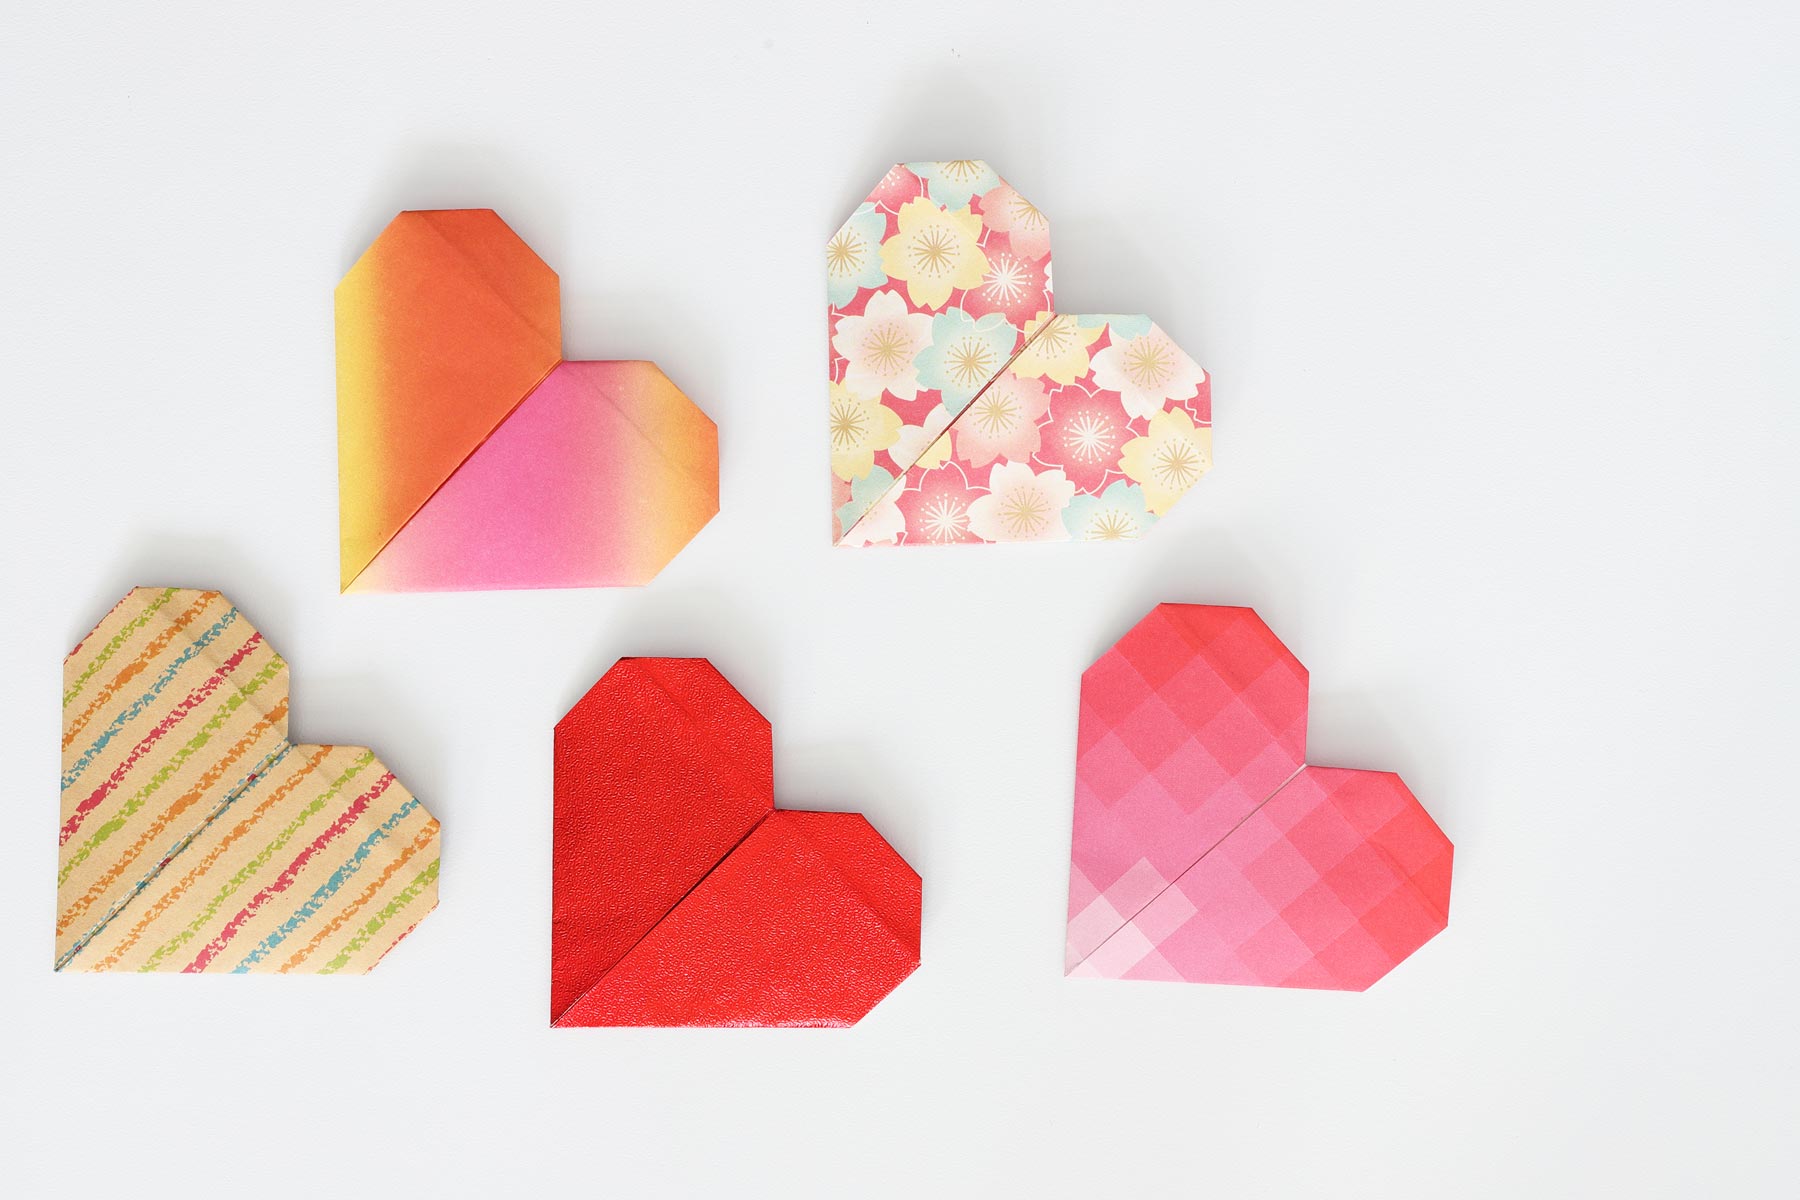 Simple Origami Heart Tutorial and Free Patterns